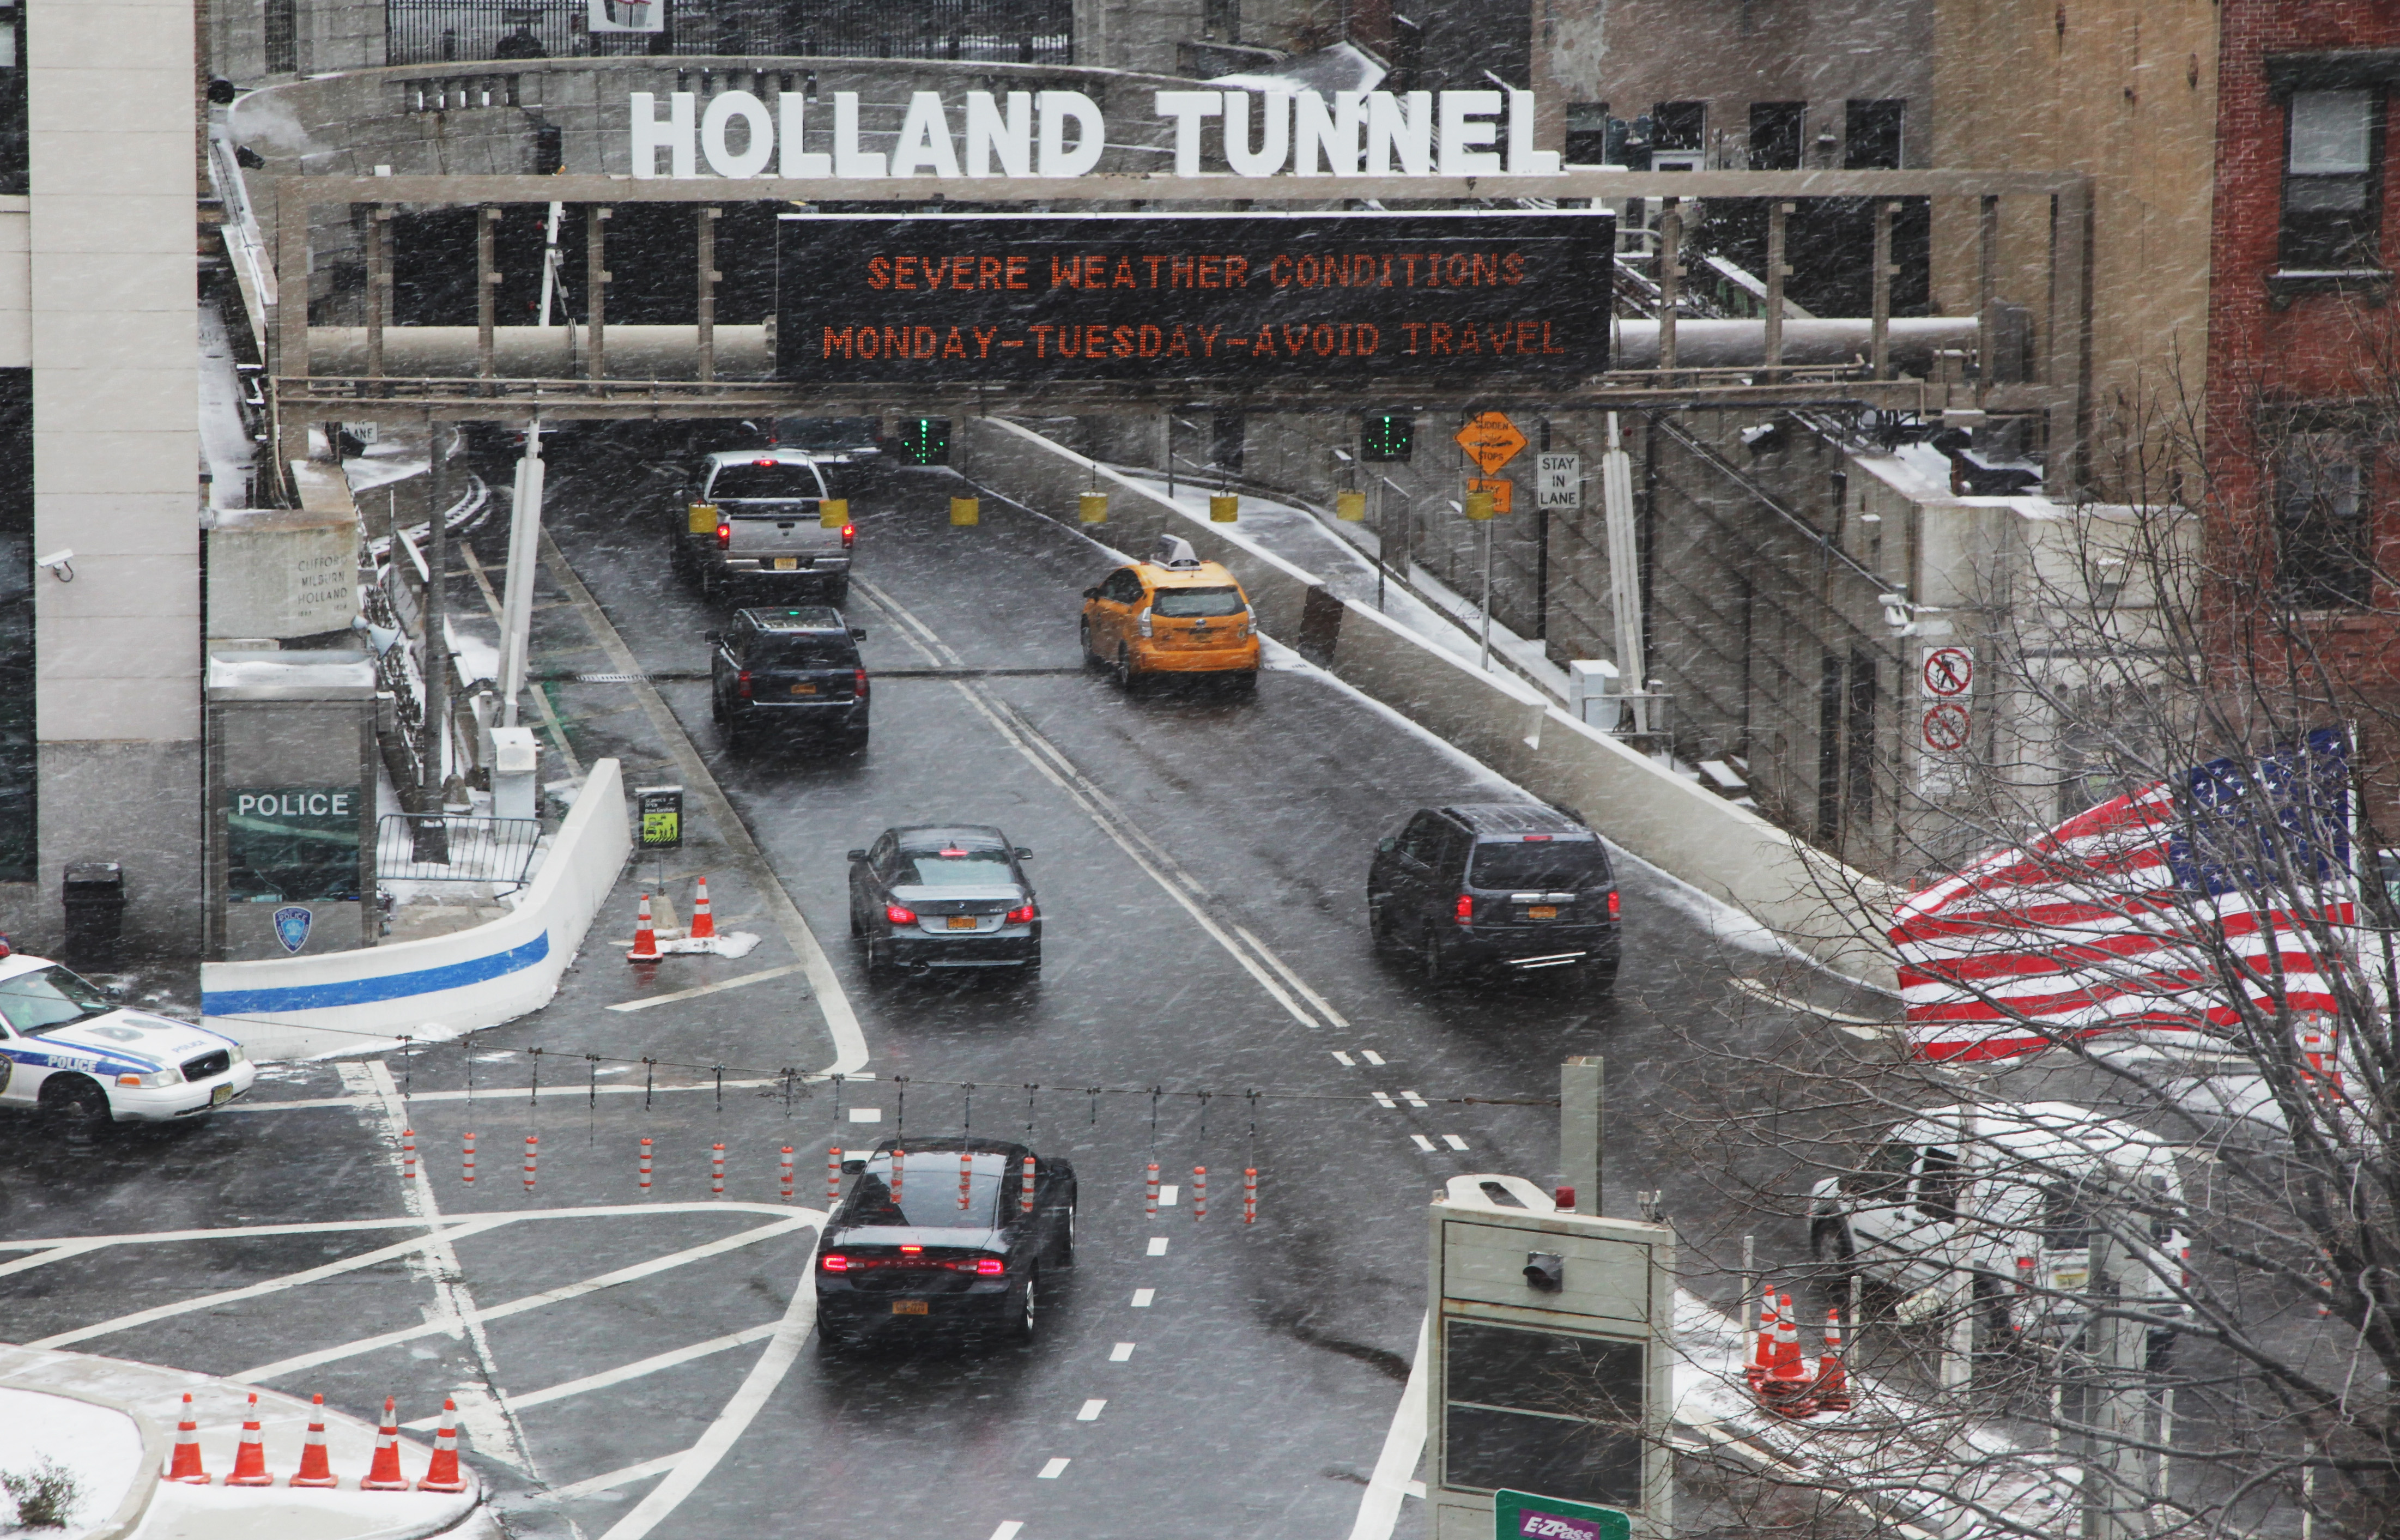 Cars travel into the Holland Tunnel under a sign warning of severe weather.(Photo: Preston Rescigno/Getty Images)